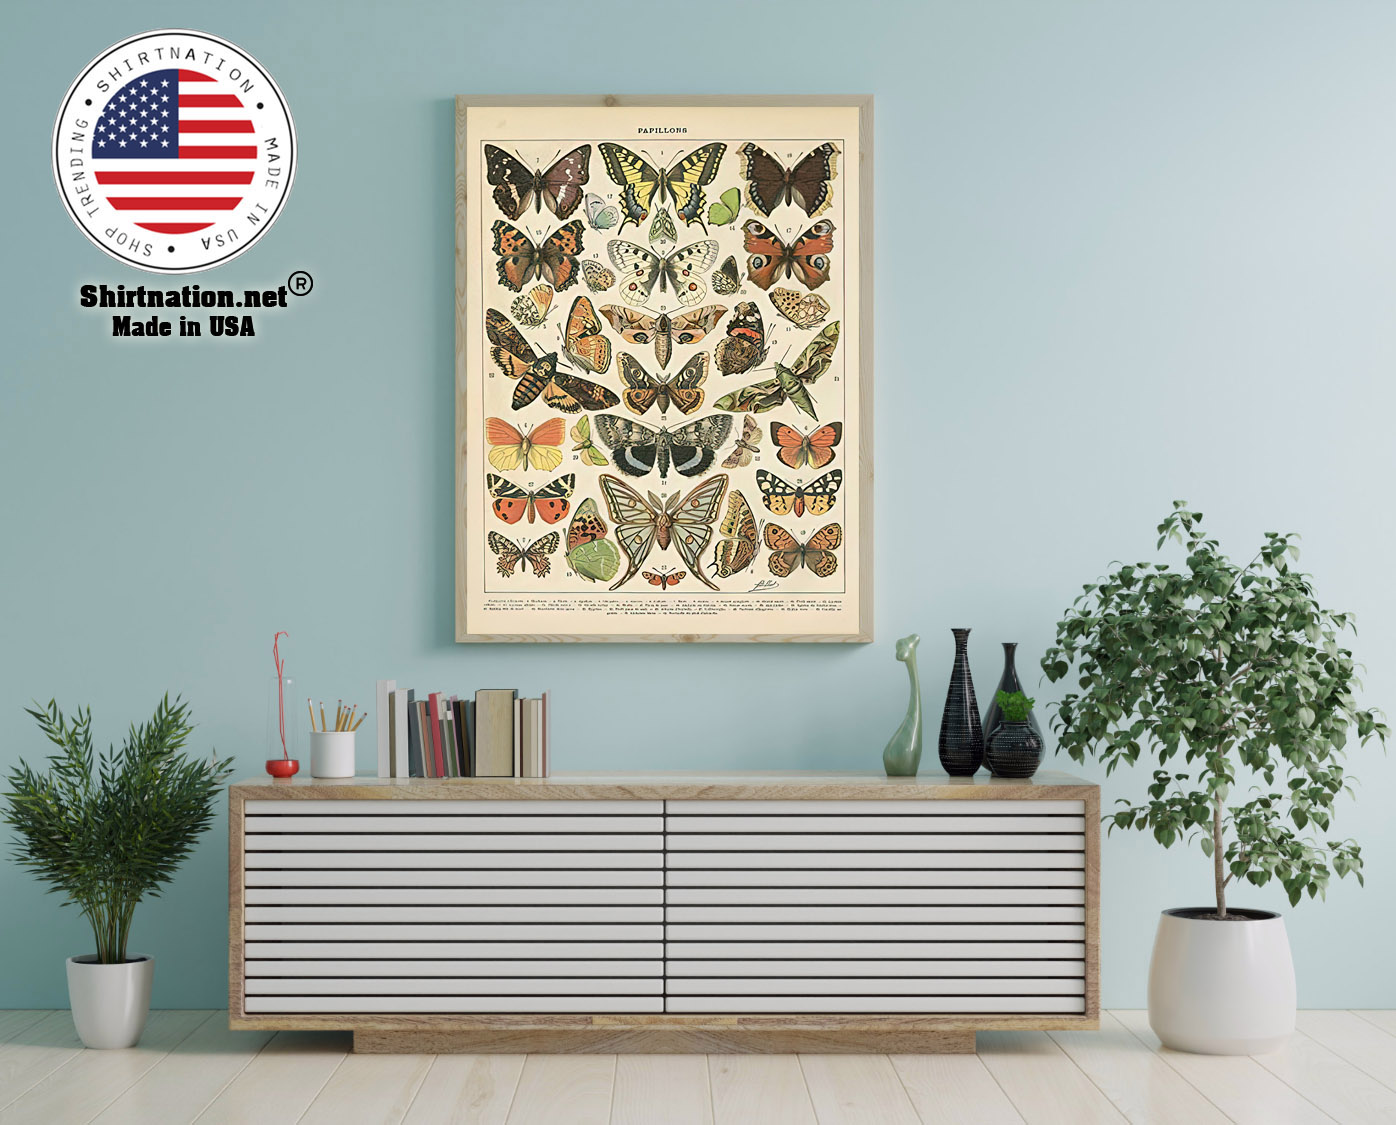 Popular vintage french types of papillons butterflies poster 12